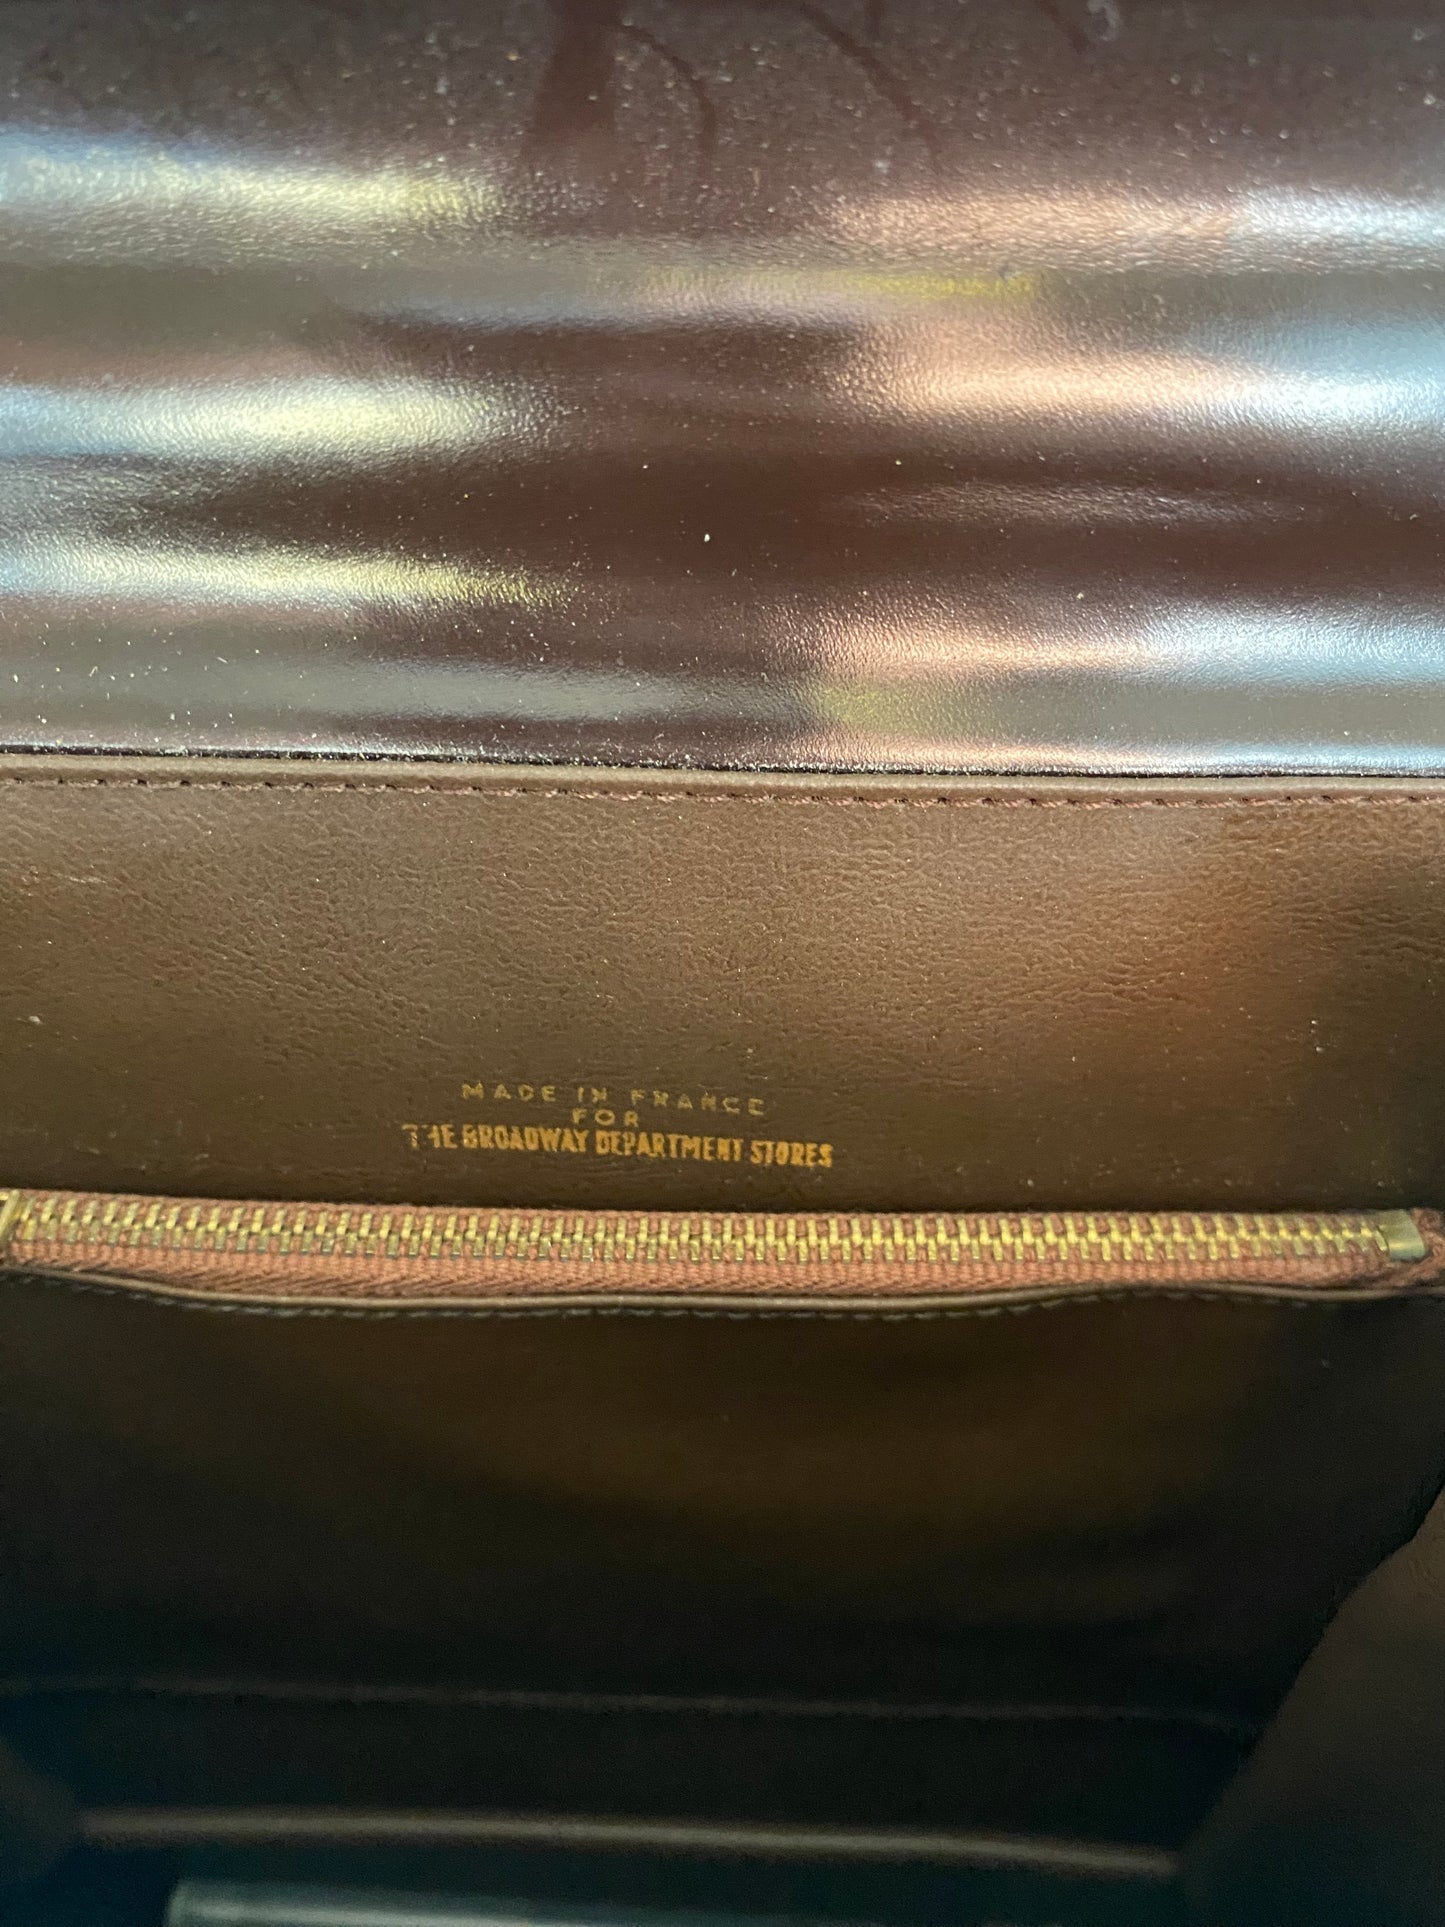 Chocolate Brown "Made in France for the Broadway Department Stores" Purse